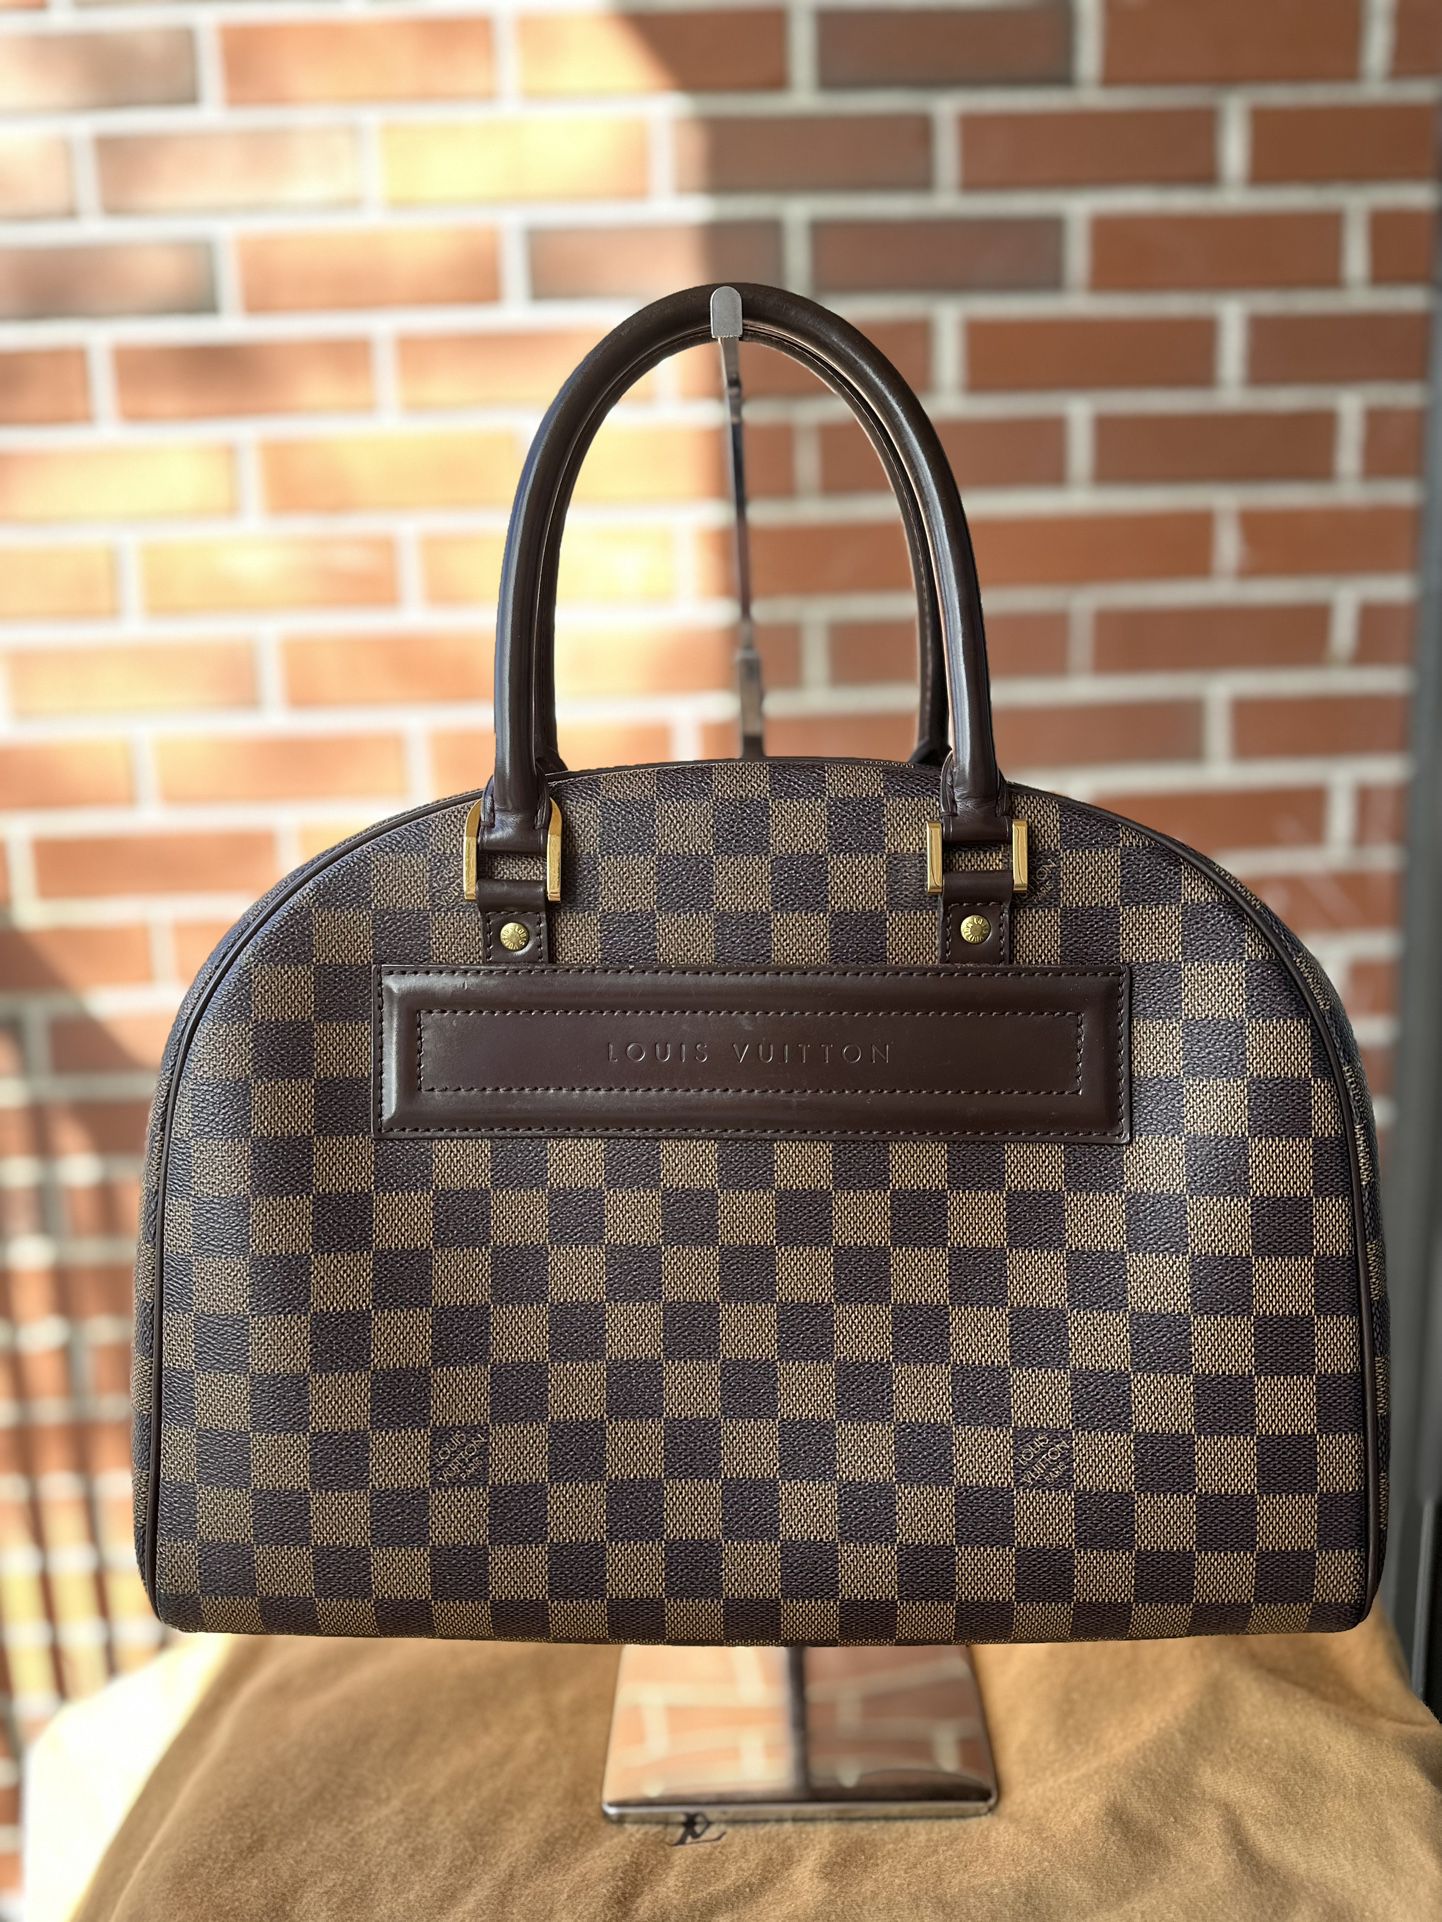 Louis Vuitton Nolita Bag - Authenticated With QR Code For Reference